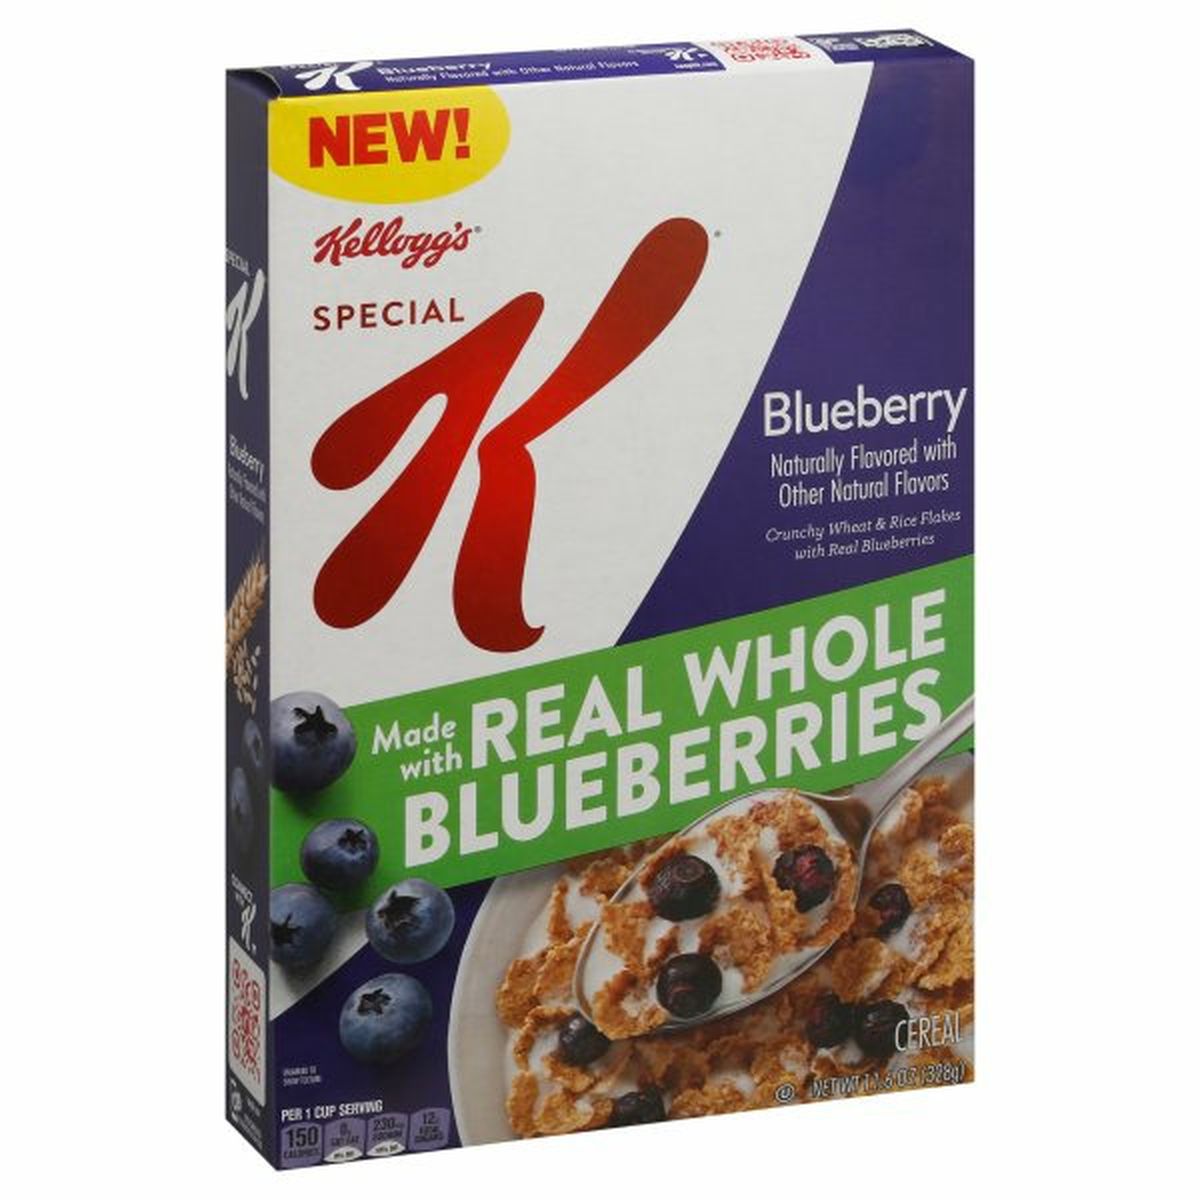 Calories in Kellogg's Special K Cereal, Blueberry